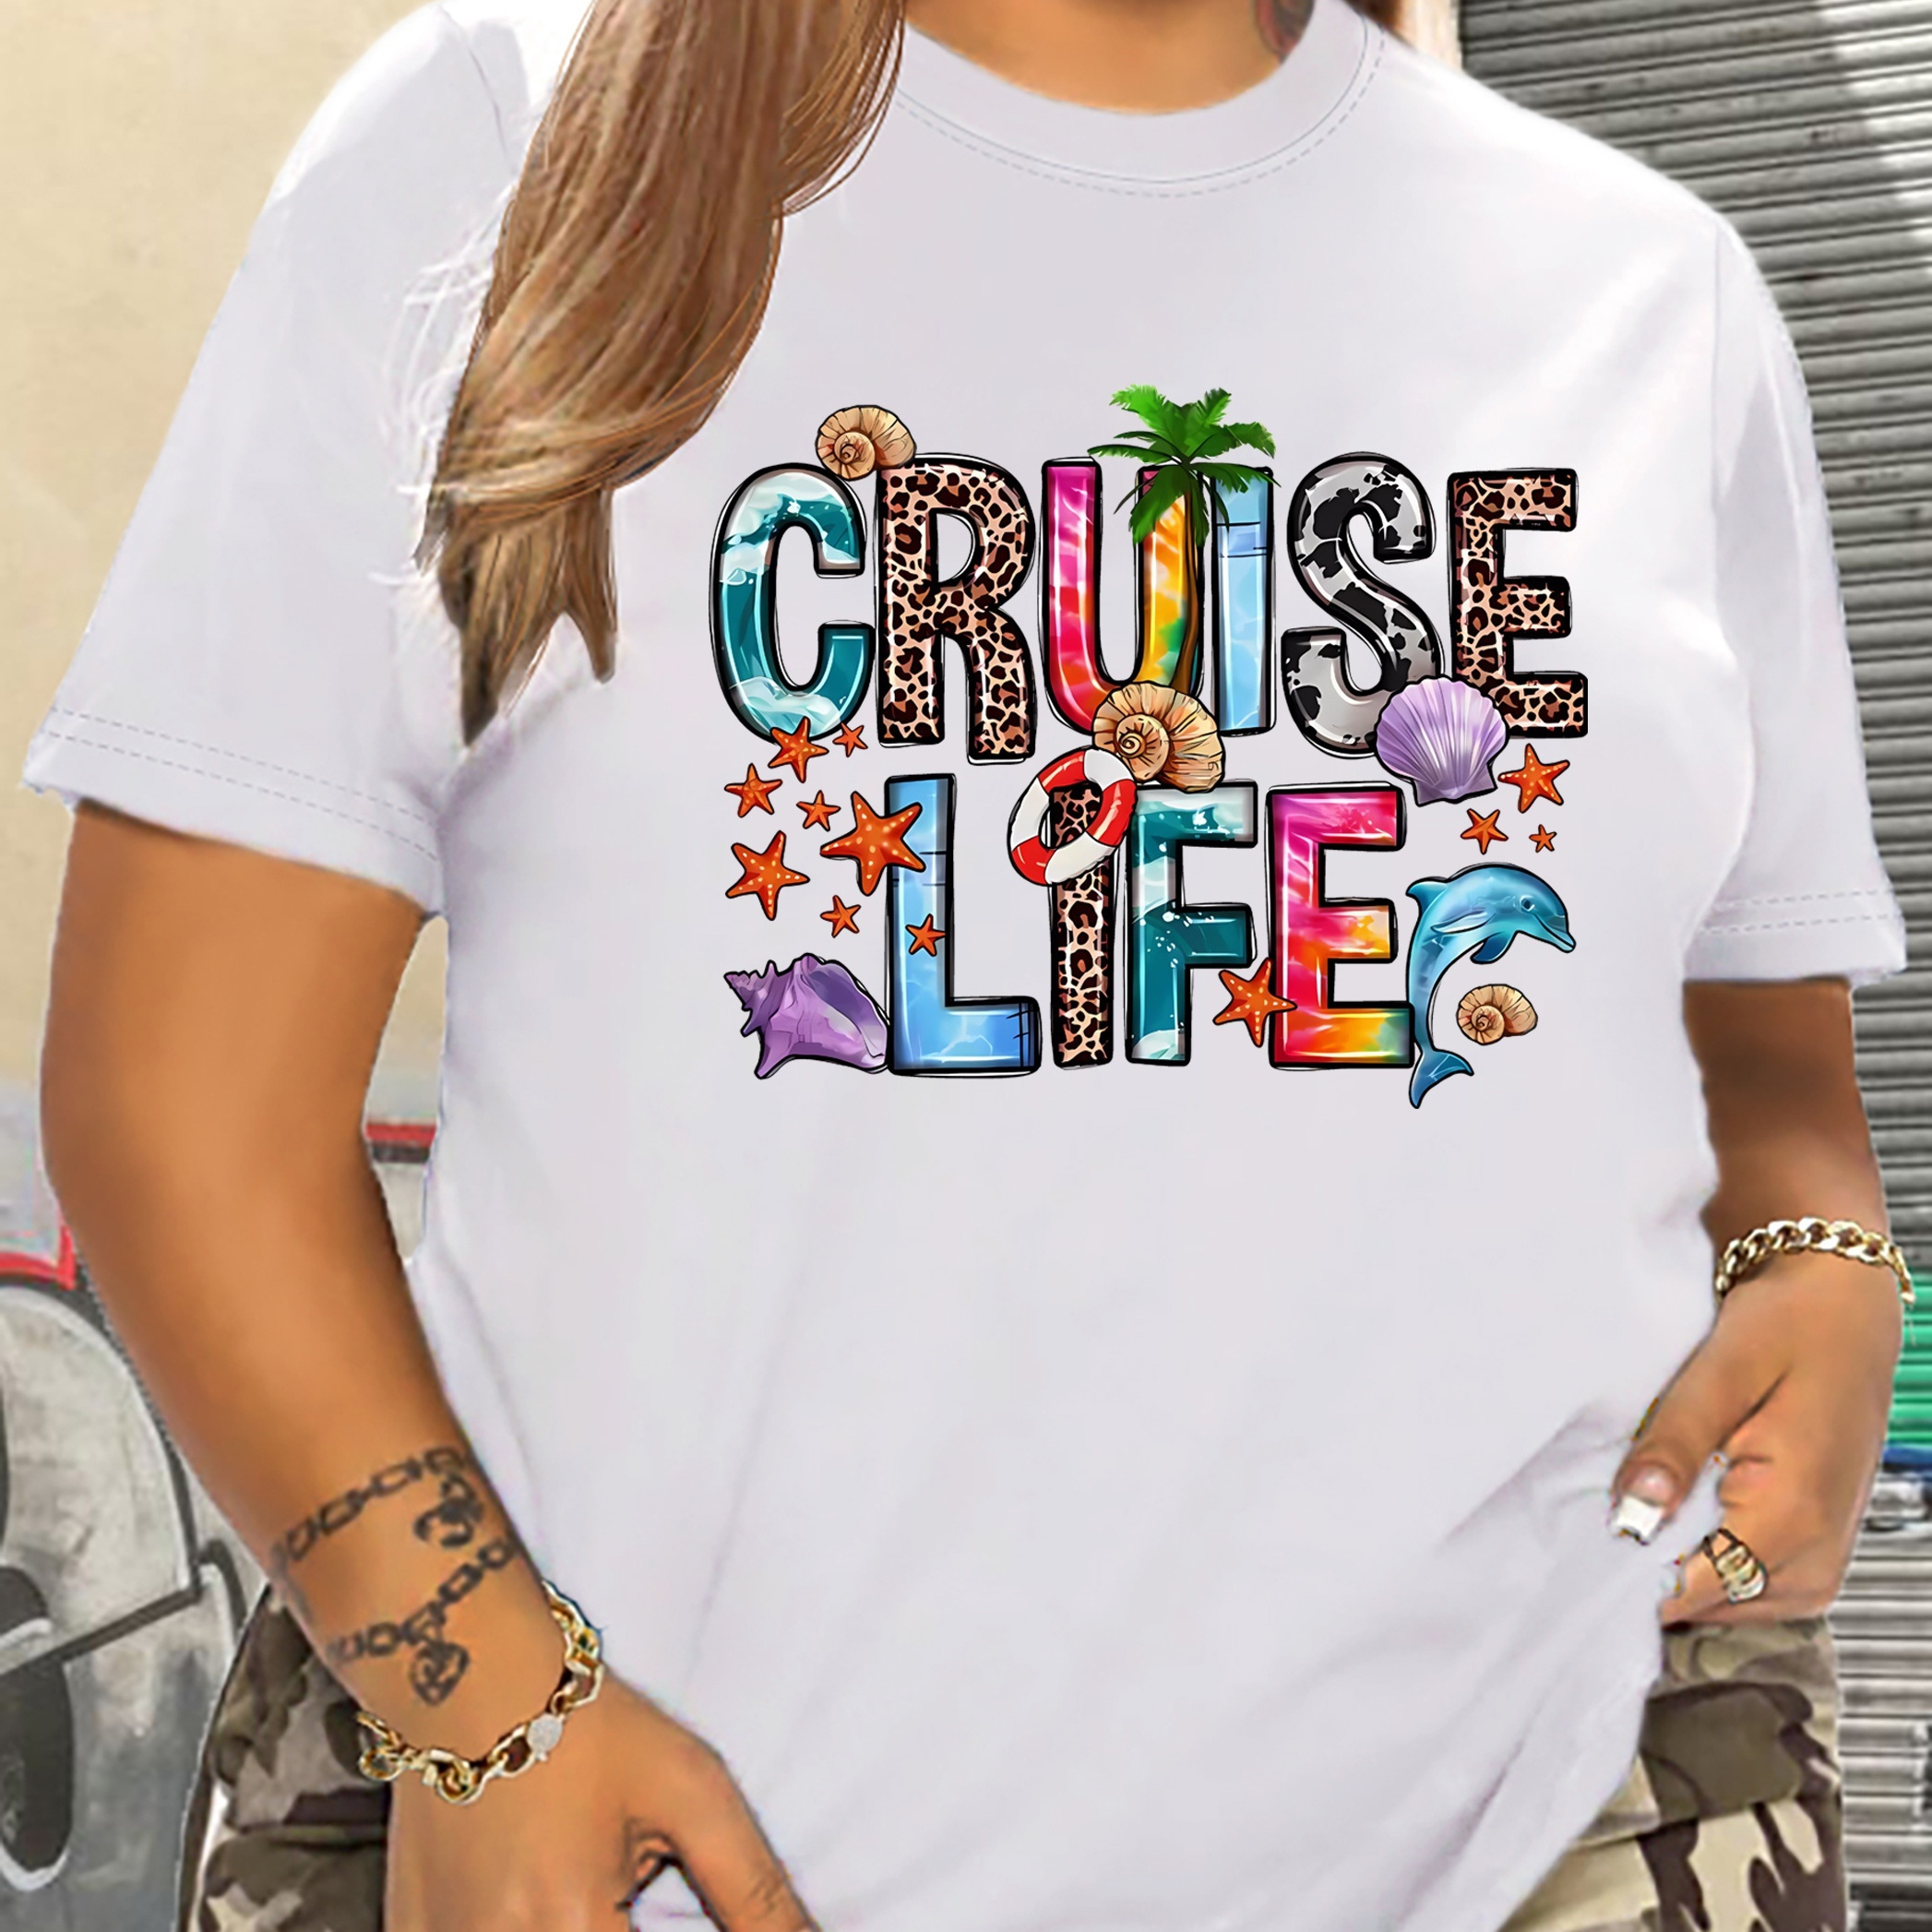 

Women's Plus Size Casual Sporty Short Sleeve T-shirt With Colorful "cruise Life" Graffiti Print, Fashion Vacation Style Top With Starfish And Seashell Design, Comfortable Large Fit Tee